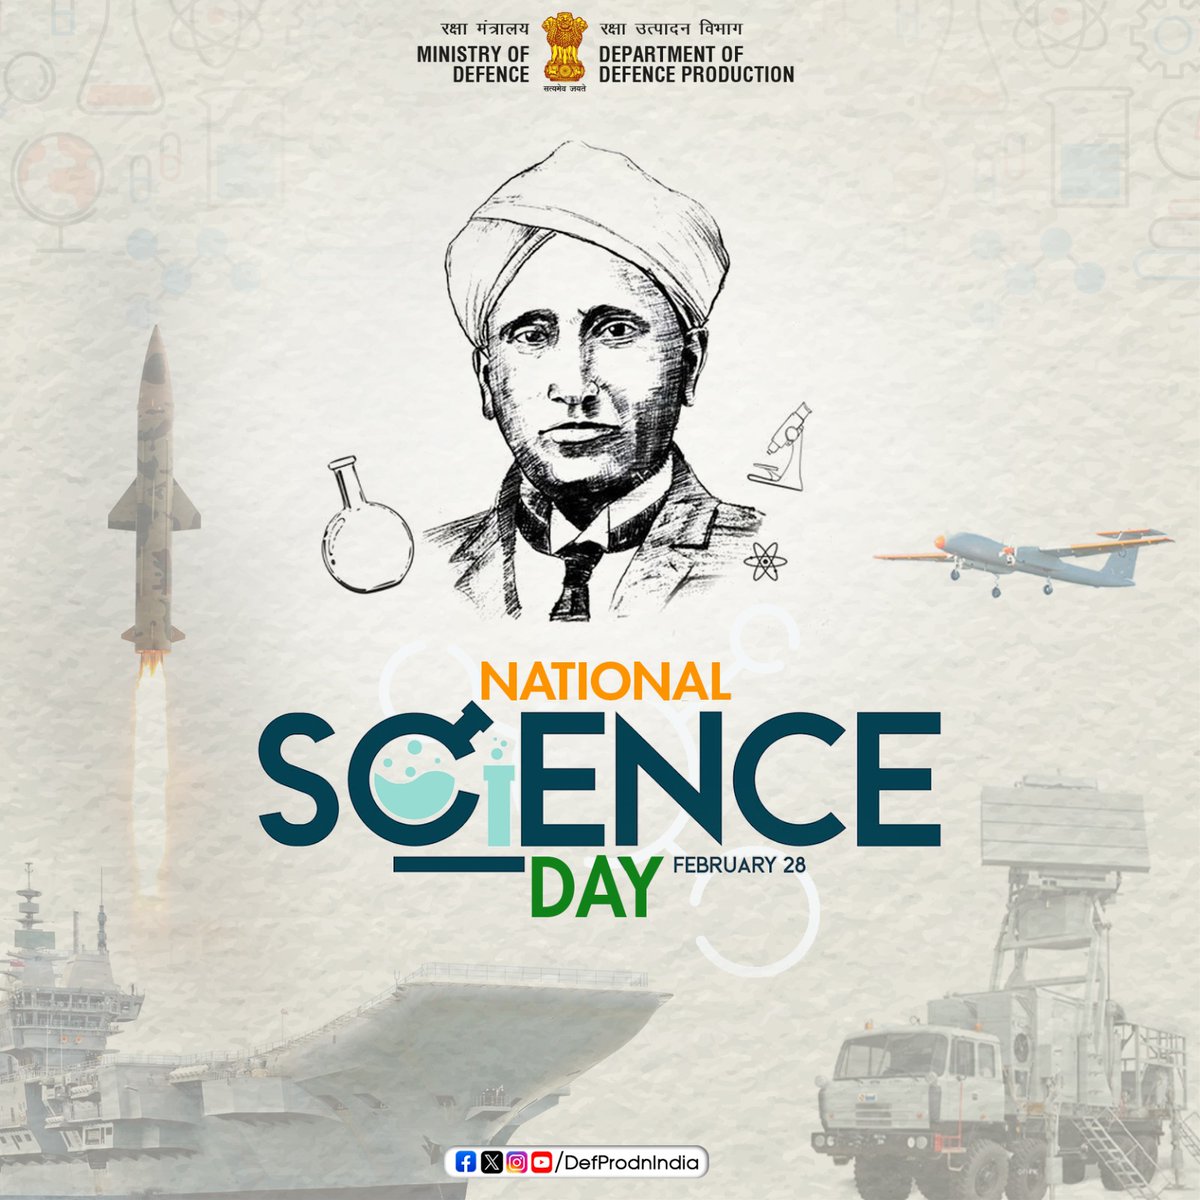 On this #NationalScienceDay, a humble salute to the pioneering contributions of iconic scientist, Nobel Laureate #BharatRatna Dr. #CVRaman. 
Together, let's create an ecosystem that ignites Defence innovation and boosts #AatmanirbharBharat & #MakeinIndia
#ViksitBharat.